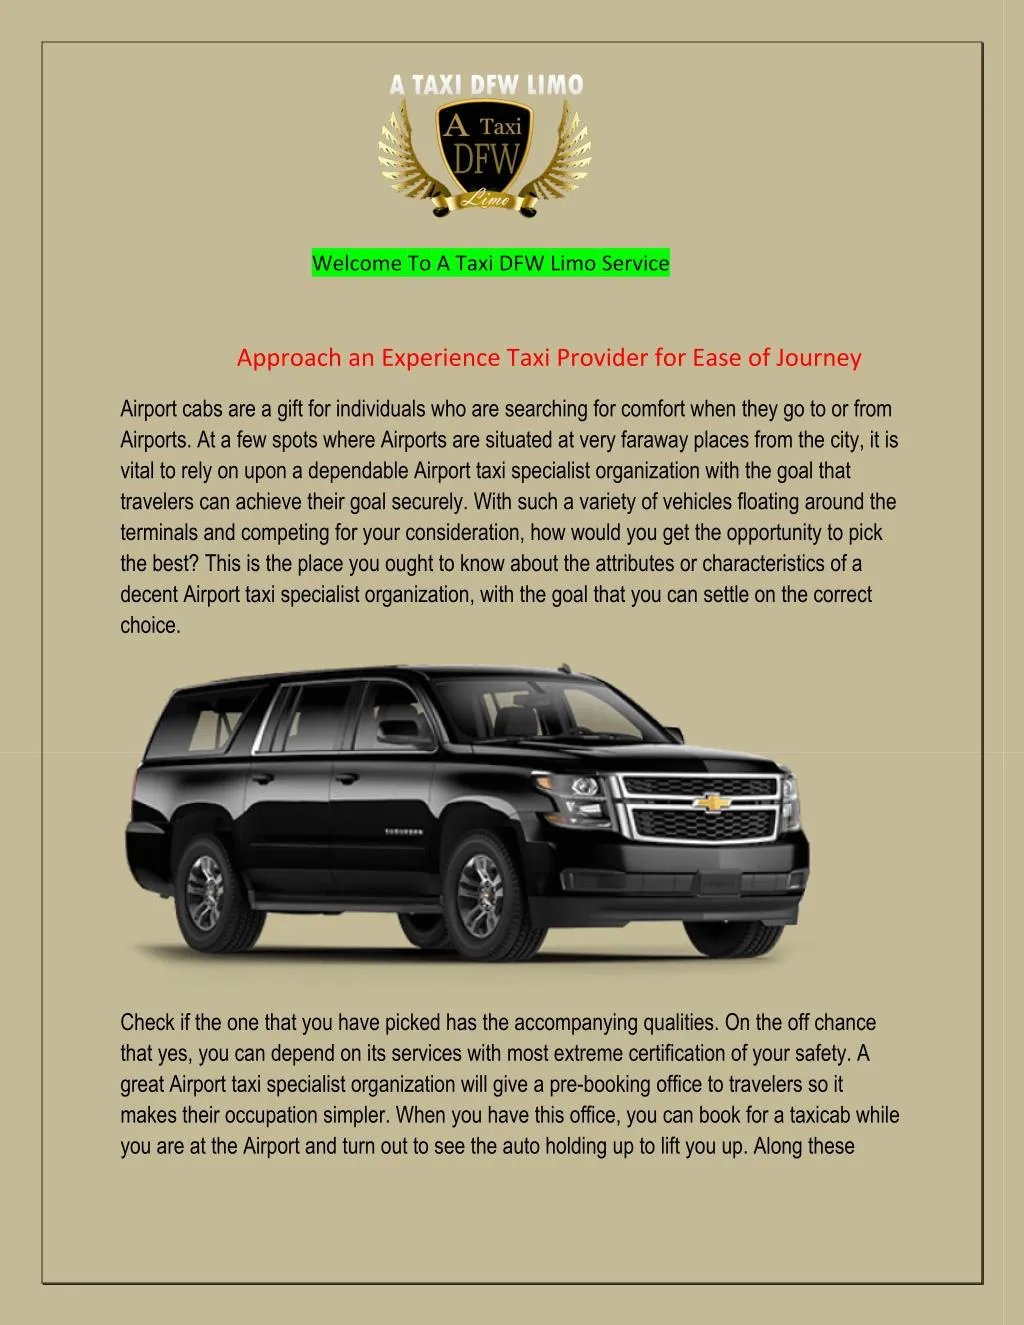 welcome to a taxi dfw limo service